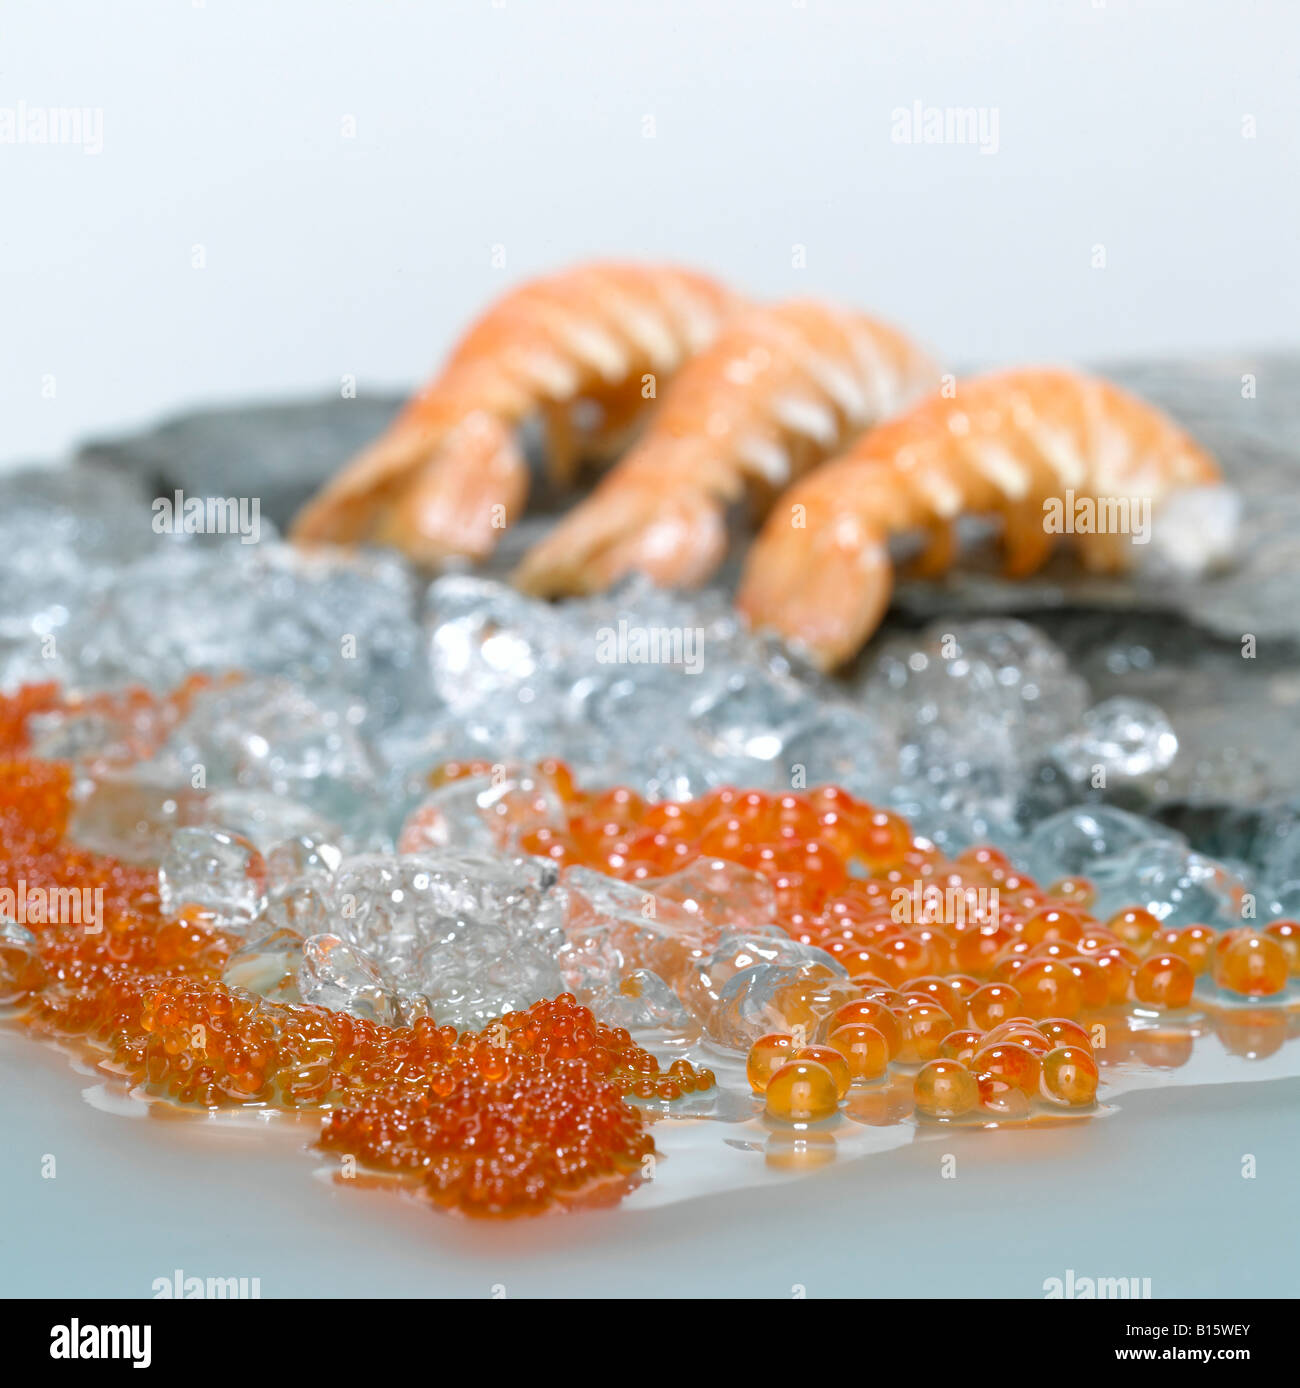 Shrimps and caviar on crushed ice Stock Photo